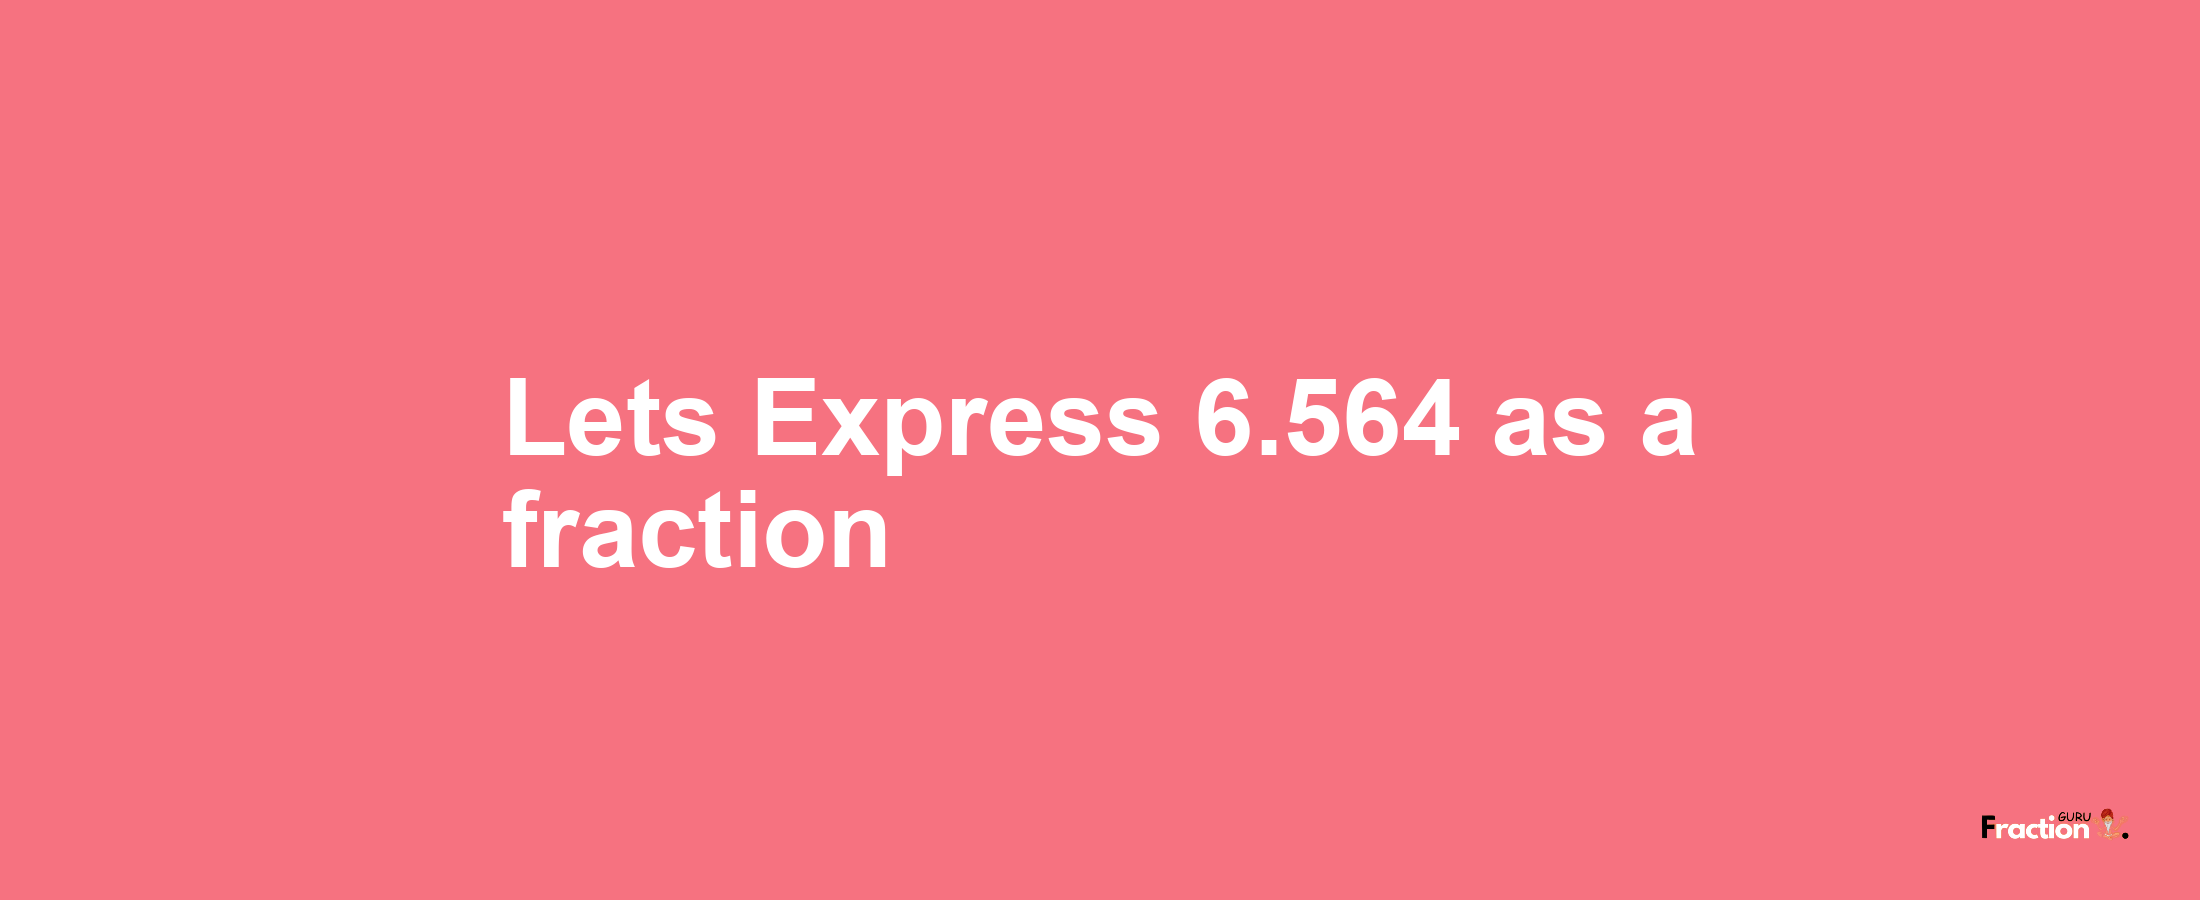 Lets Express 6.564 as afraction